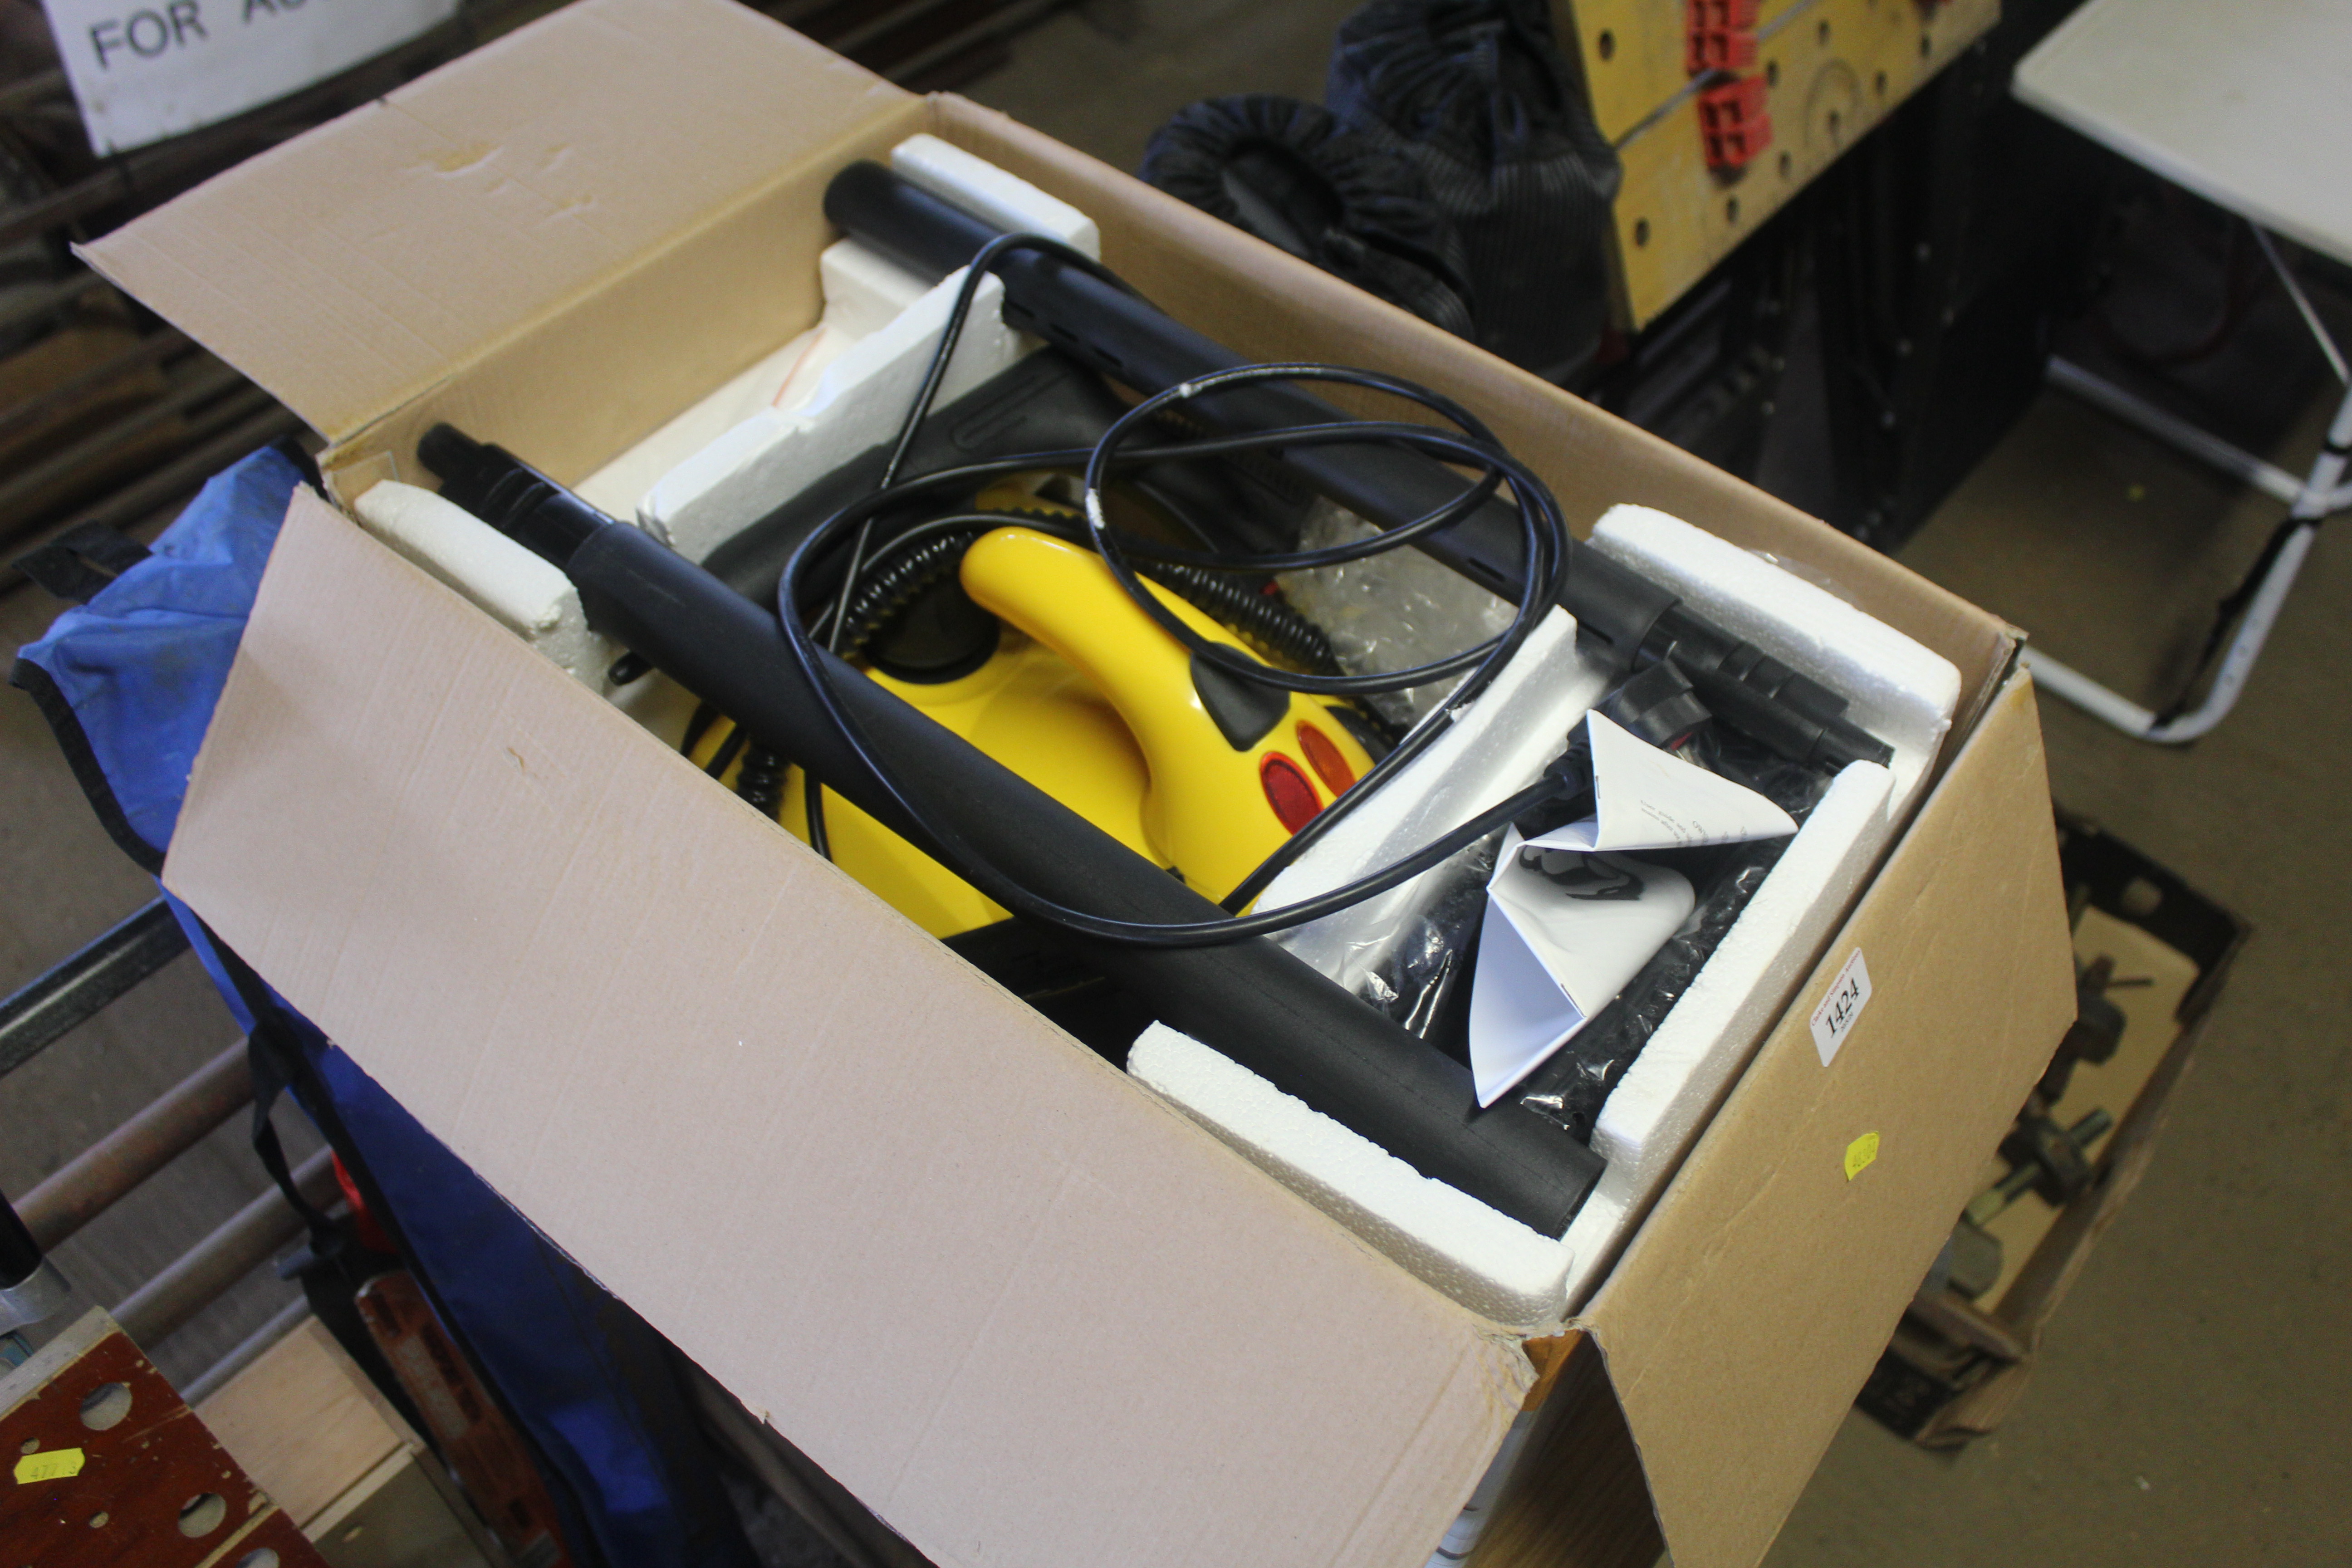 An electric steam cleaner with accessories and ori